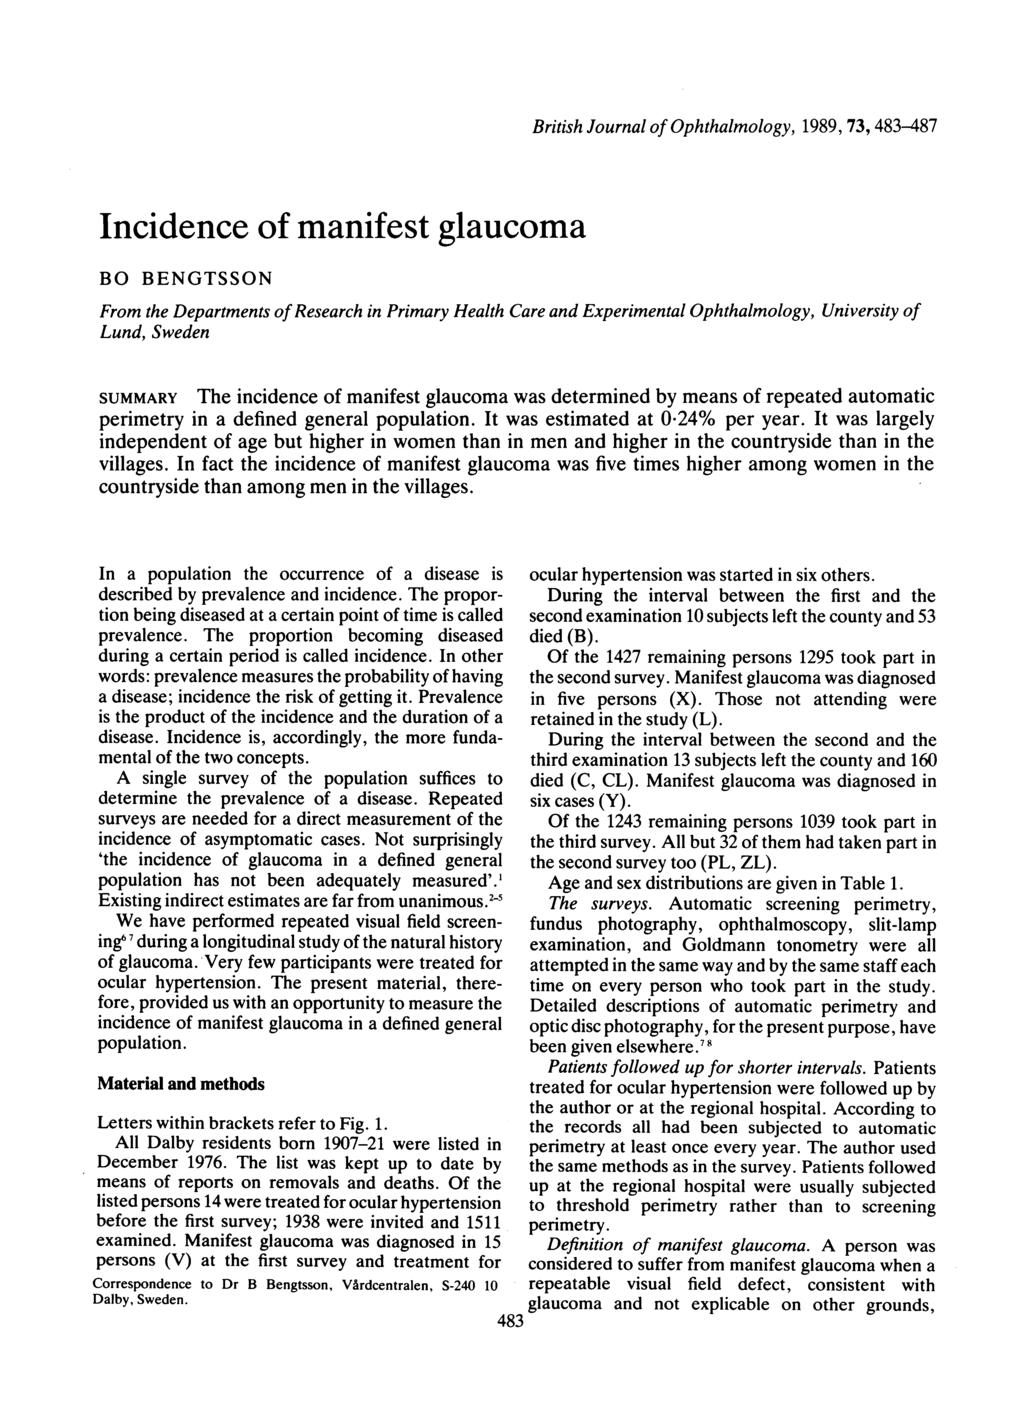 Incidence of manifest glaucoma BO BENGTSSON British Journal of Ophthalmology, 1989, 73, 483-487 From the Departments ofresearch in Primary Health Care and Experimental Ophthalmology, University of